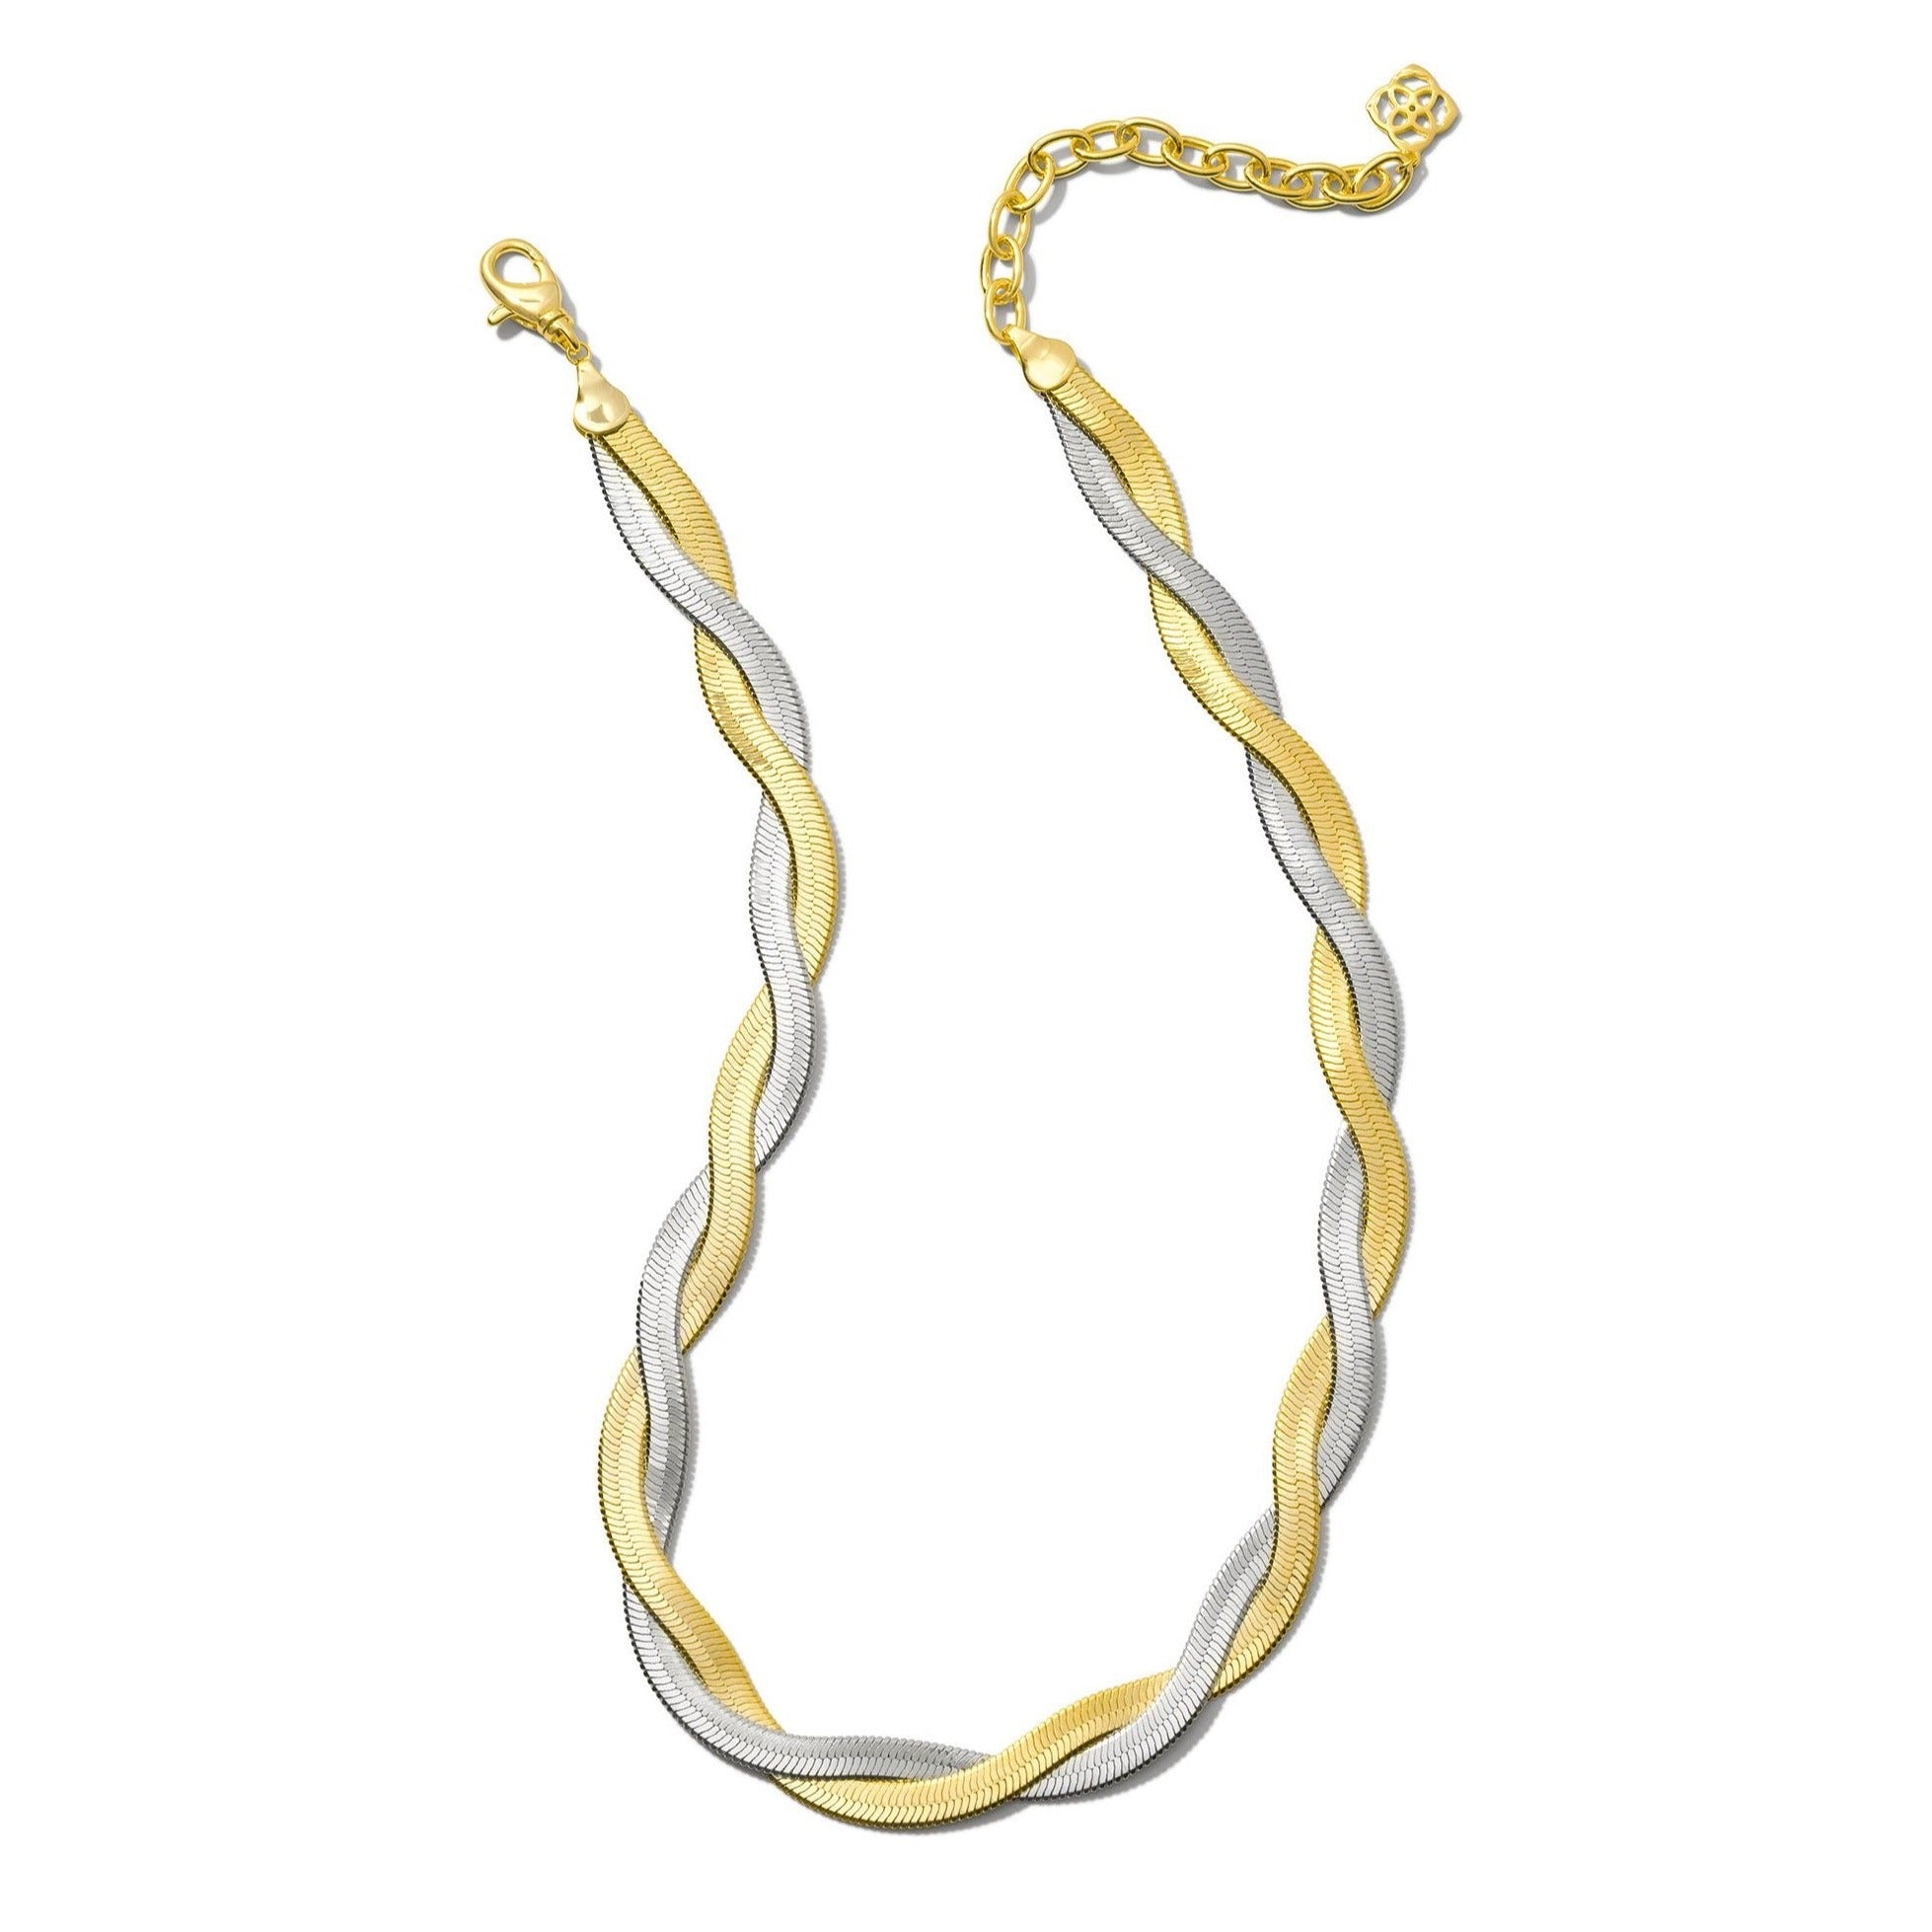 Kendra Scott | Hayden Chain Necklace in Mixed Metal - Giddy Up Glamour Boutique